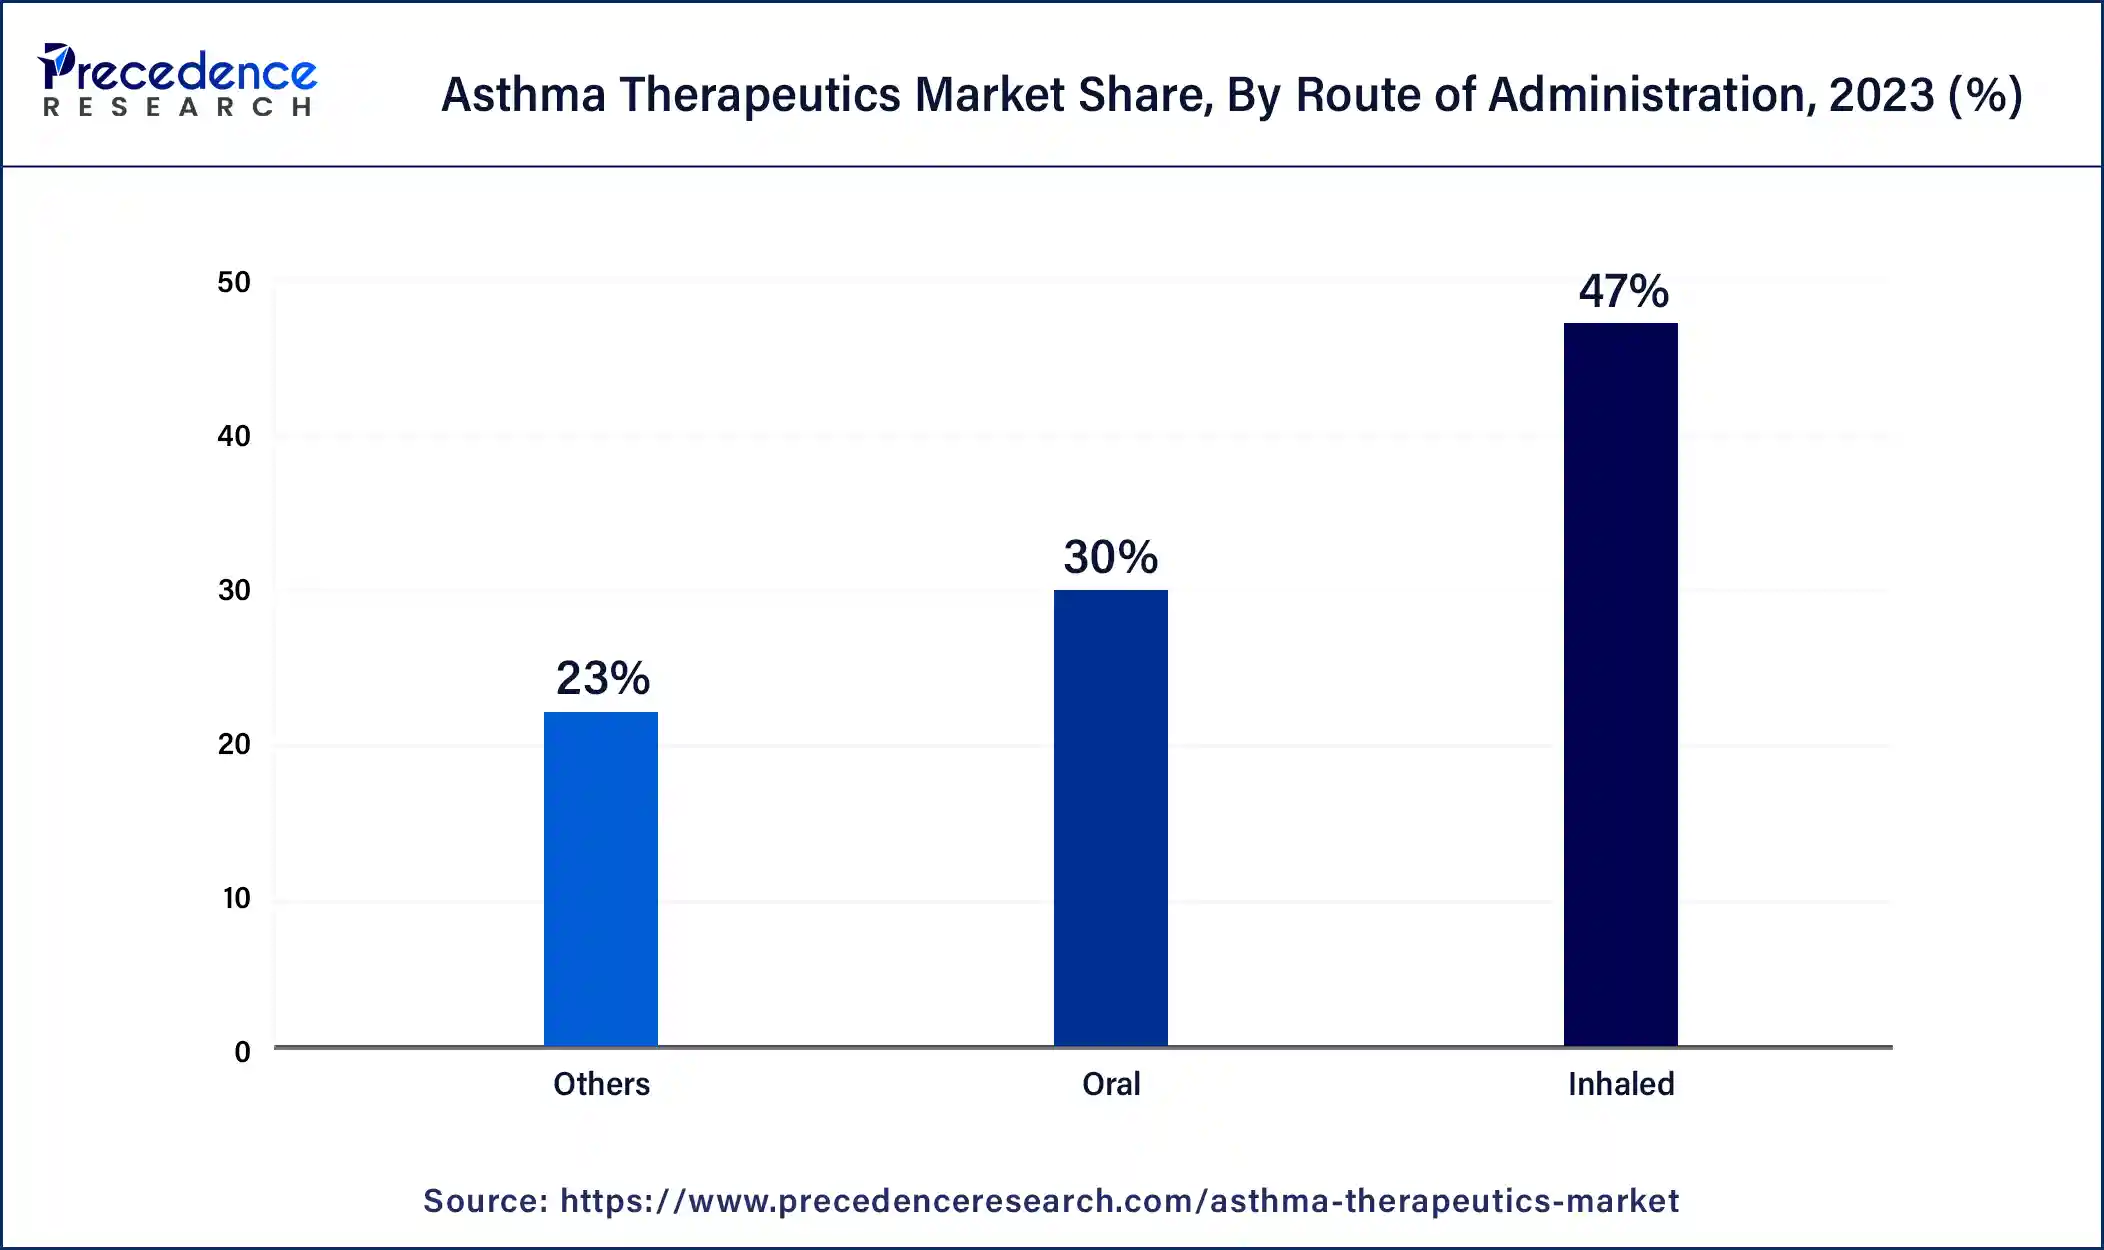 Asthma Therapeutics Market Share, By Route of Administration, 2023 (%)